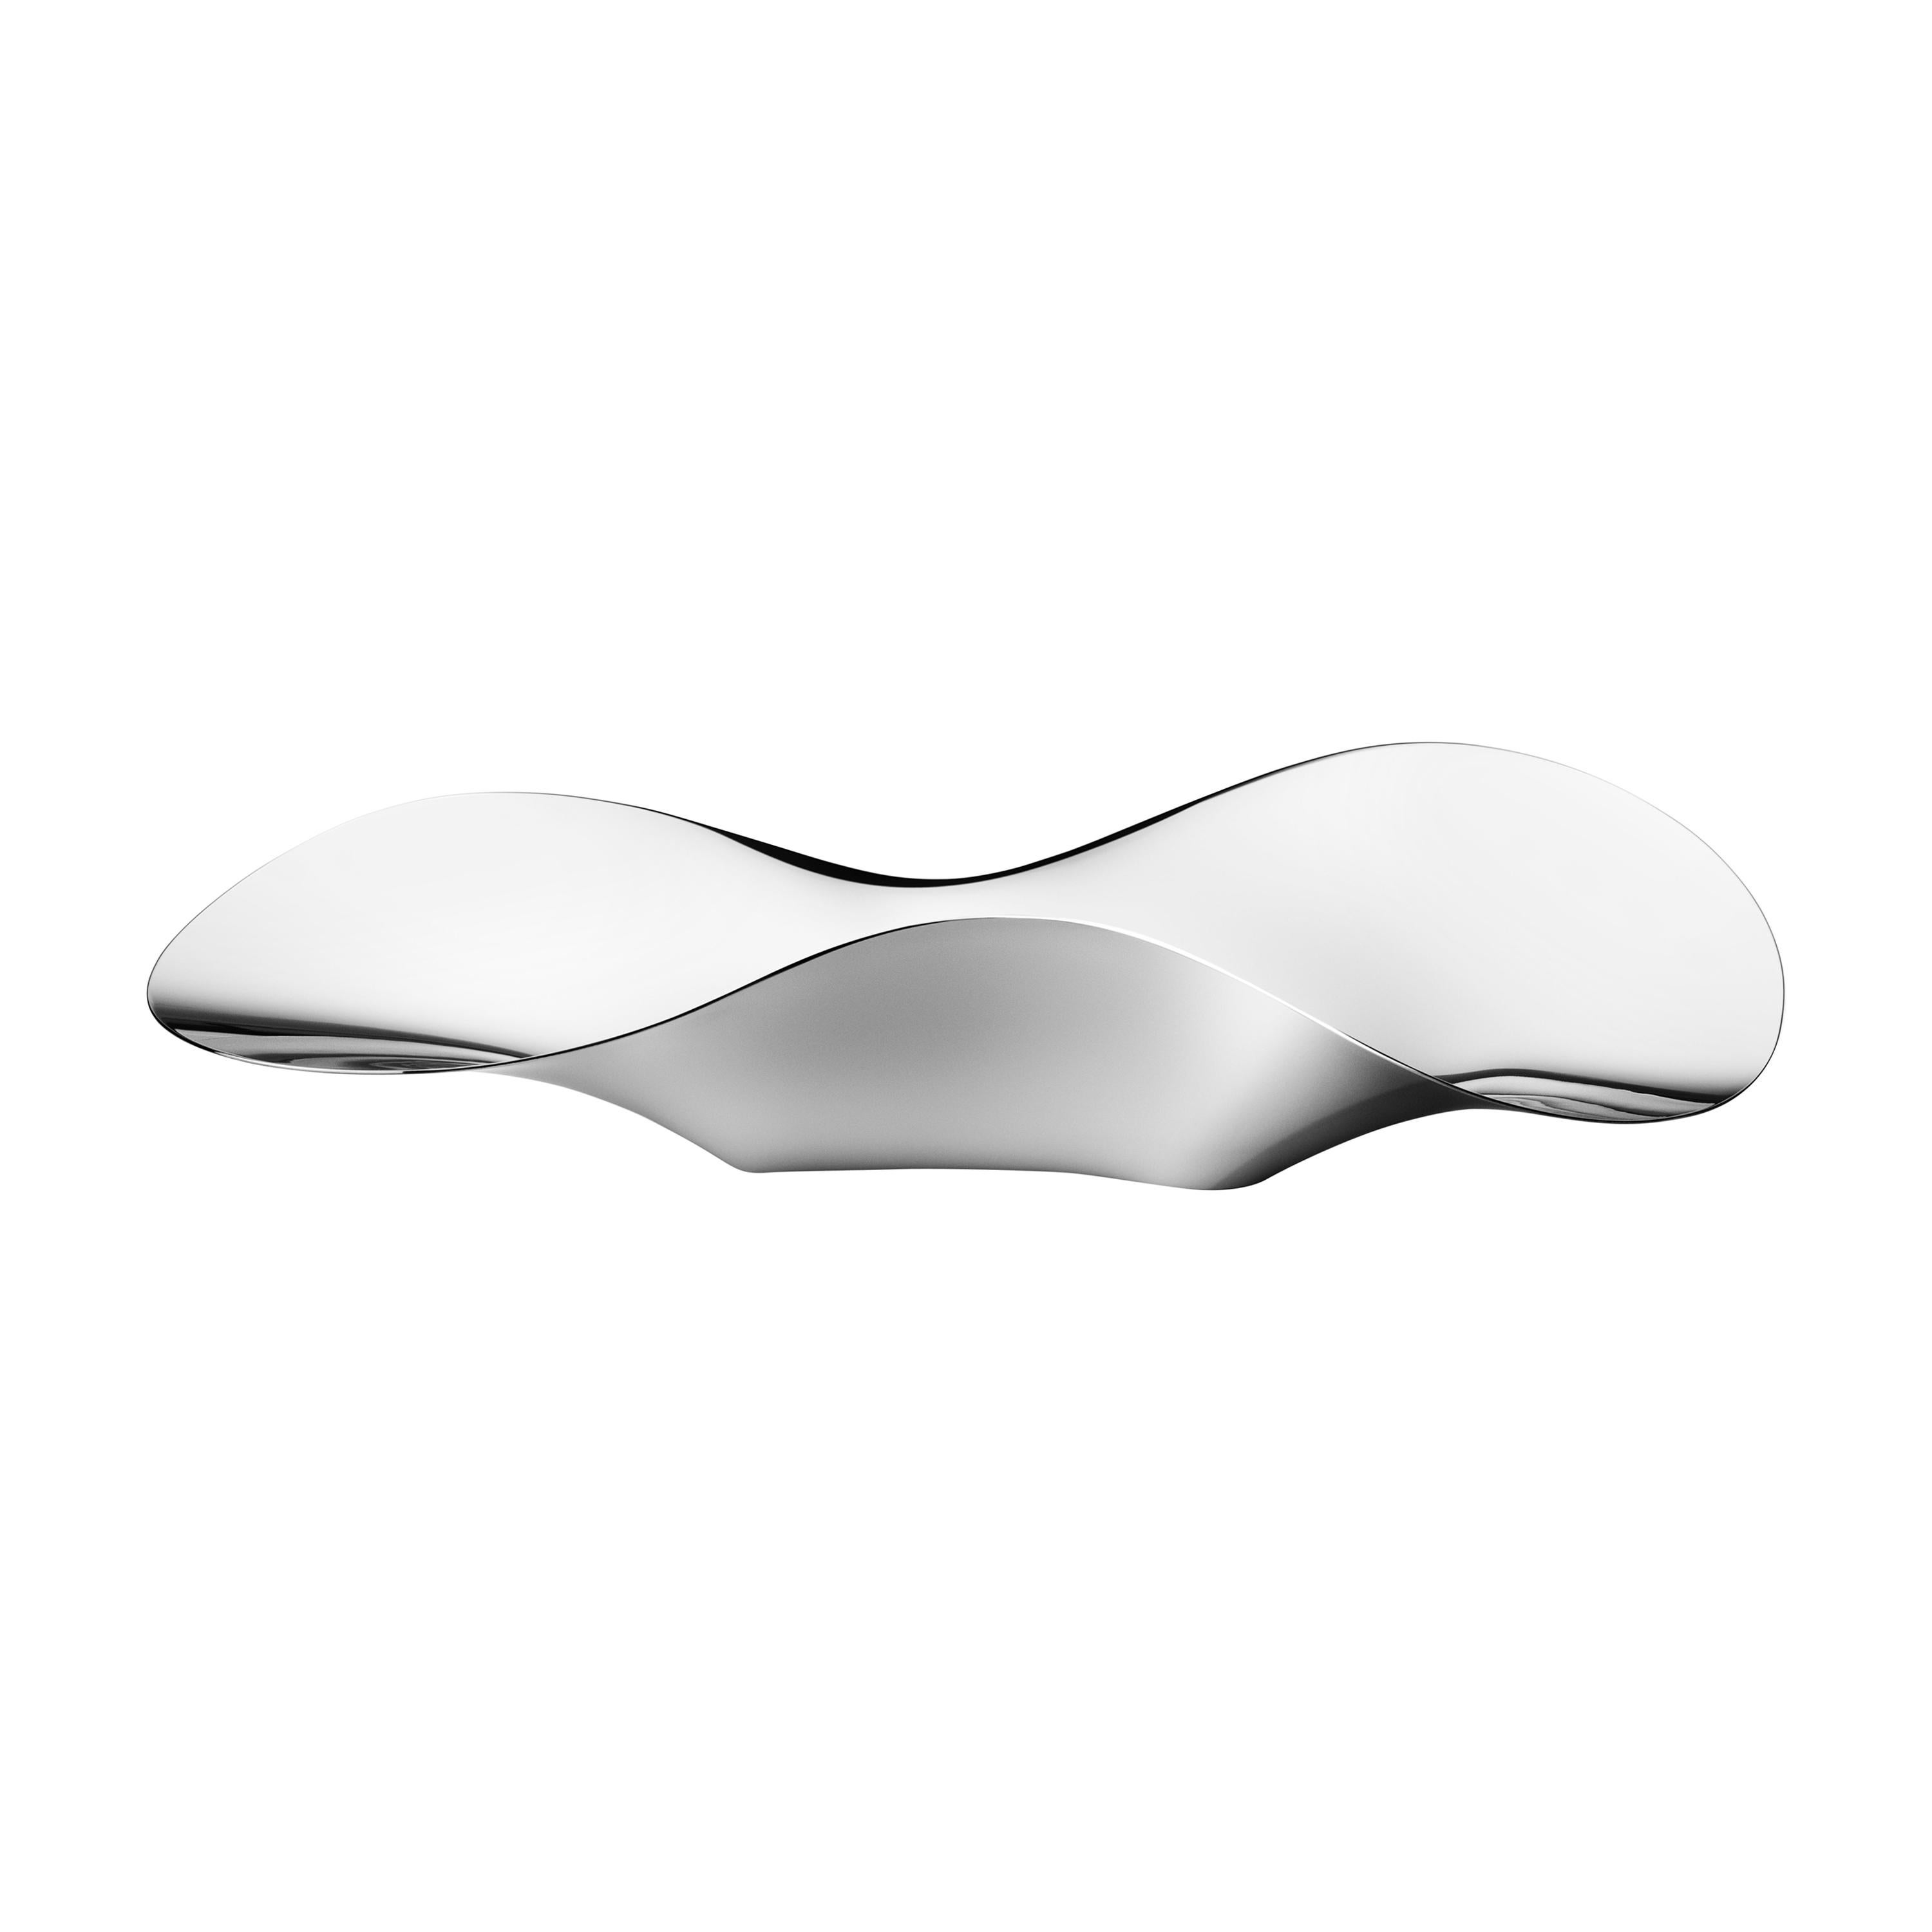 Georg Jensen Indulgence Strawberry Bowl in Stainless Steel by Helle Damkjær For Sale